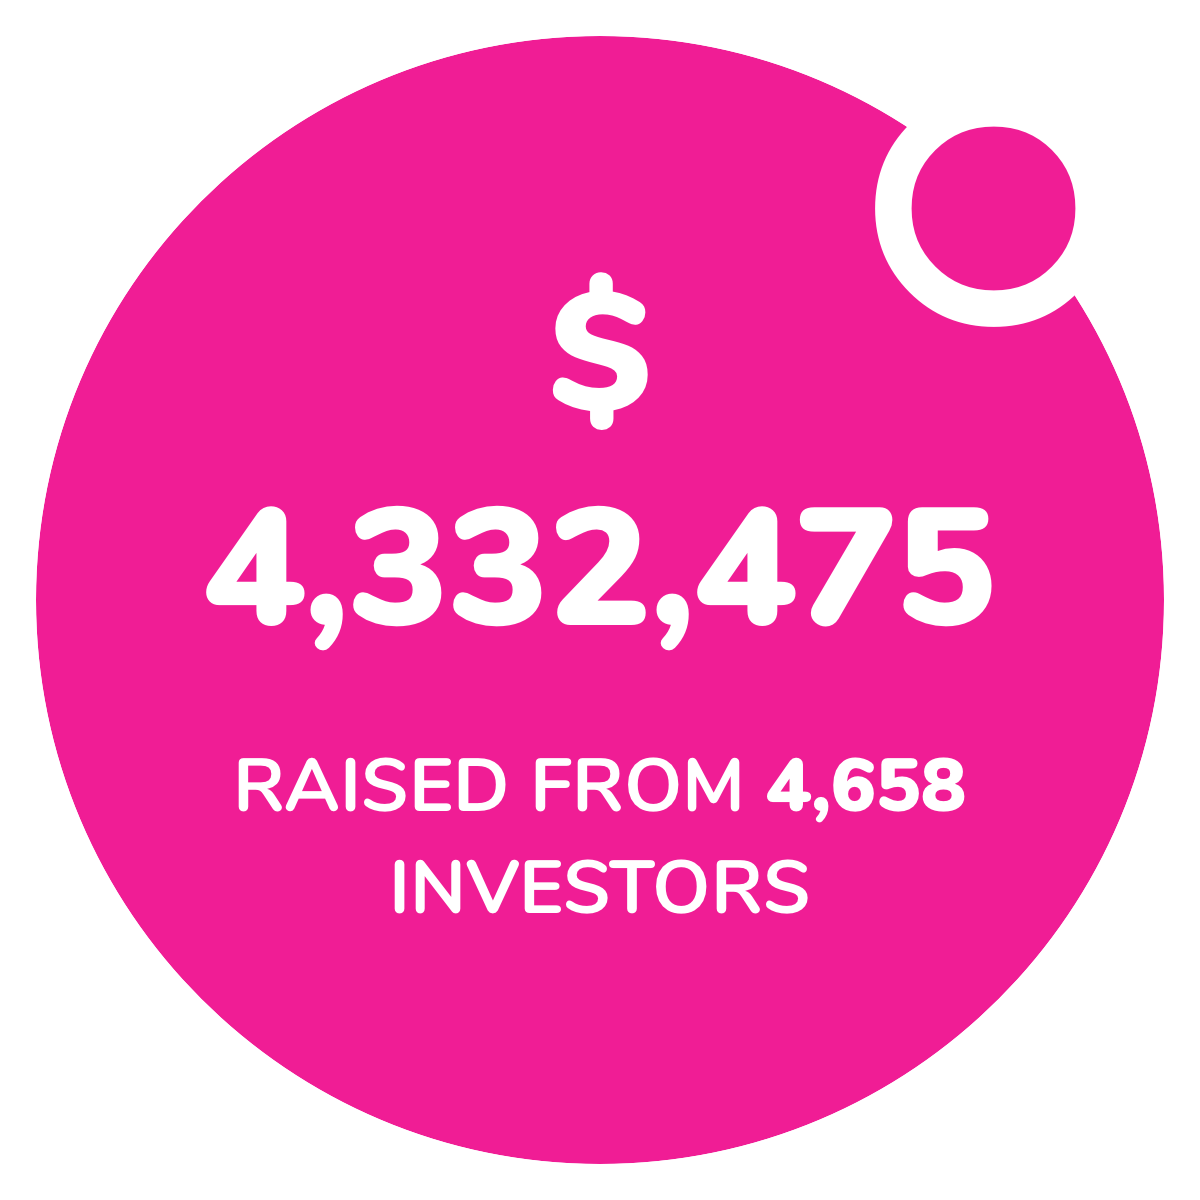 Total amount raised from investors